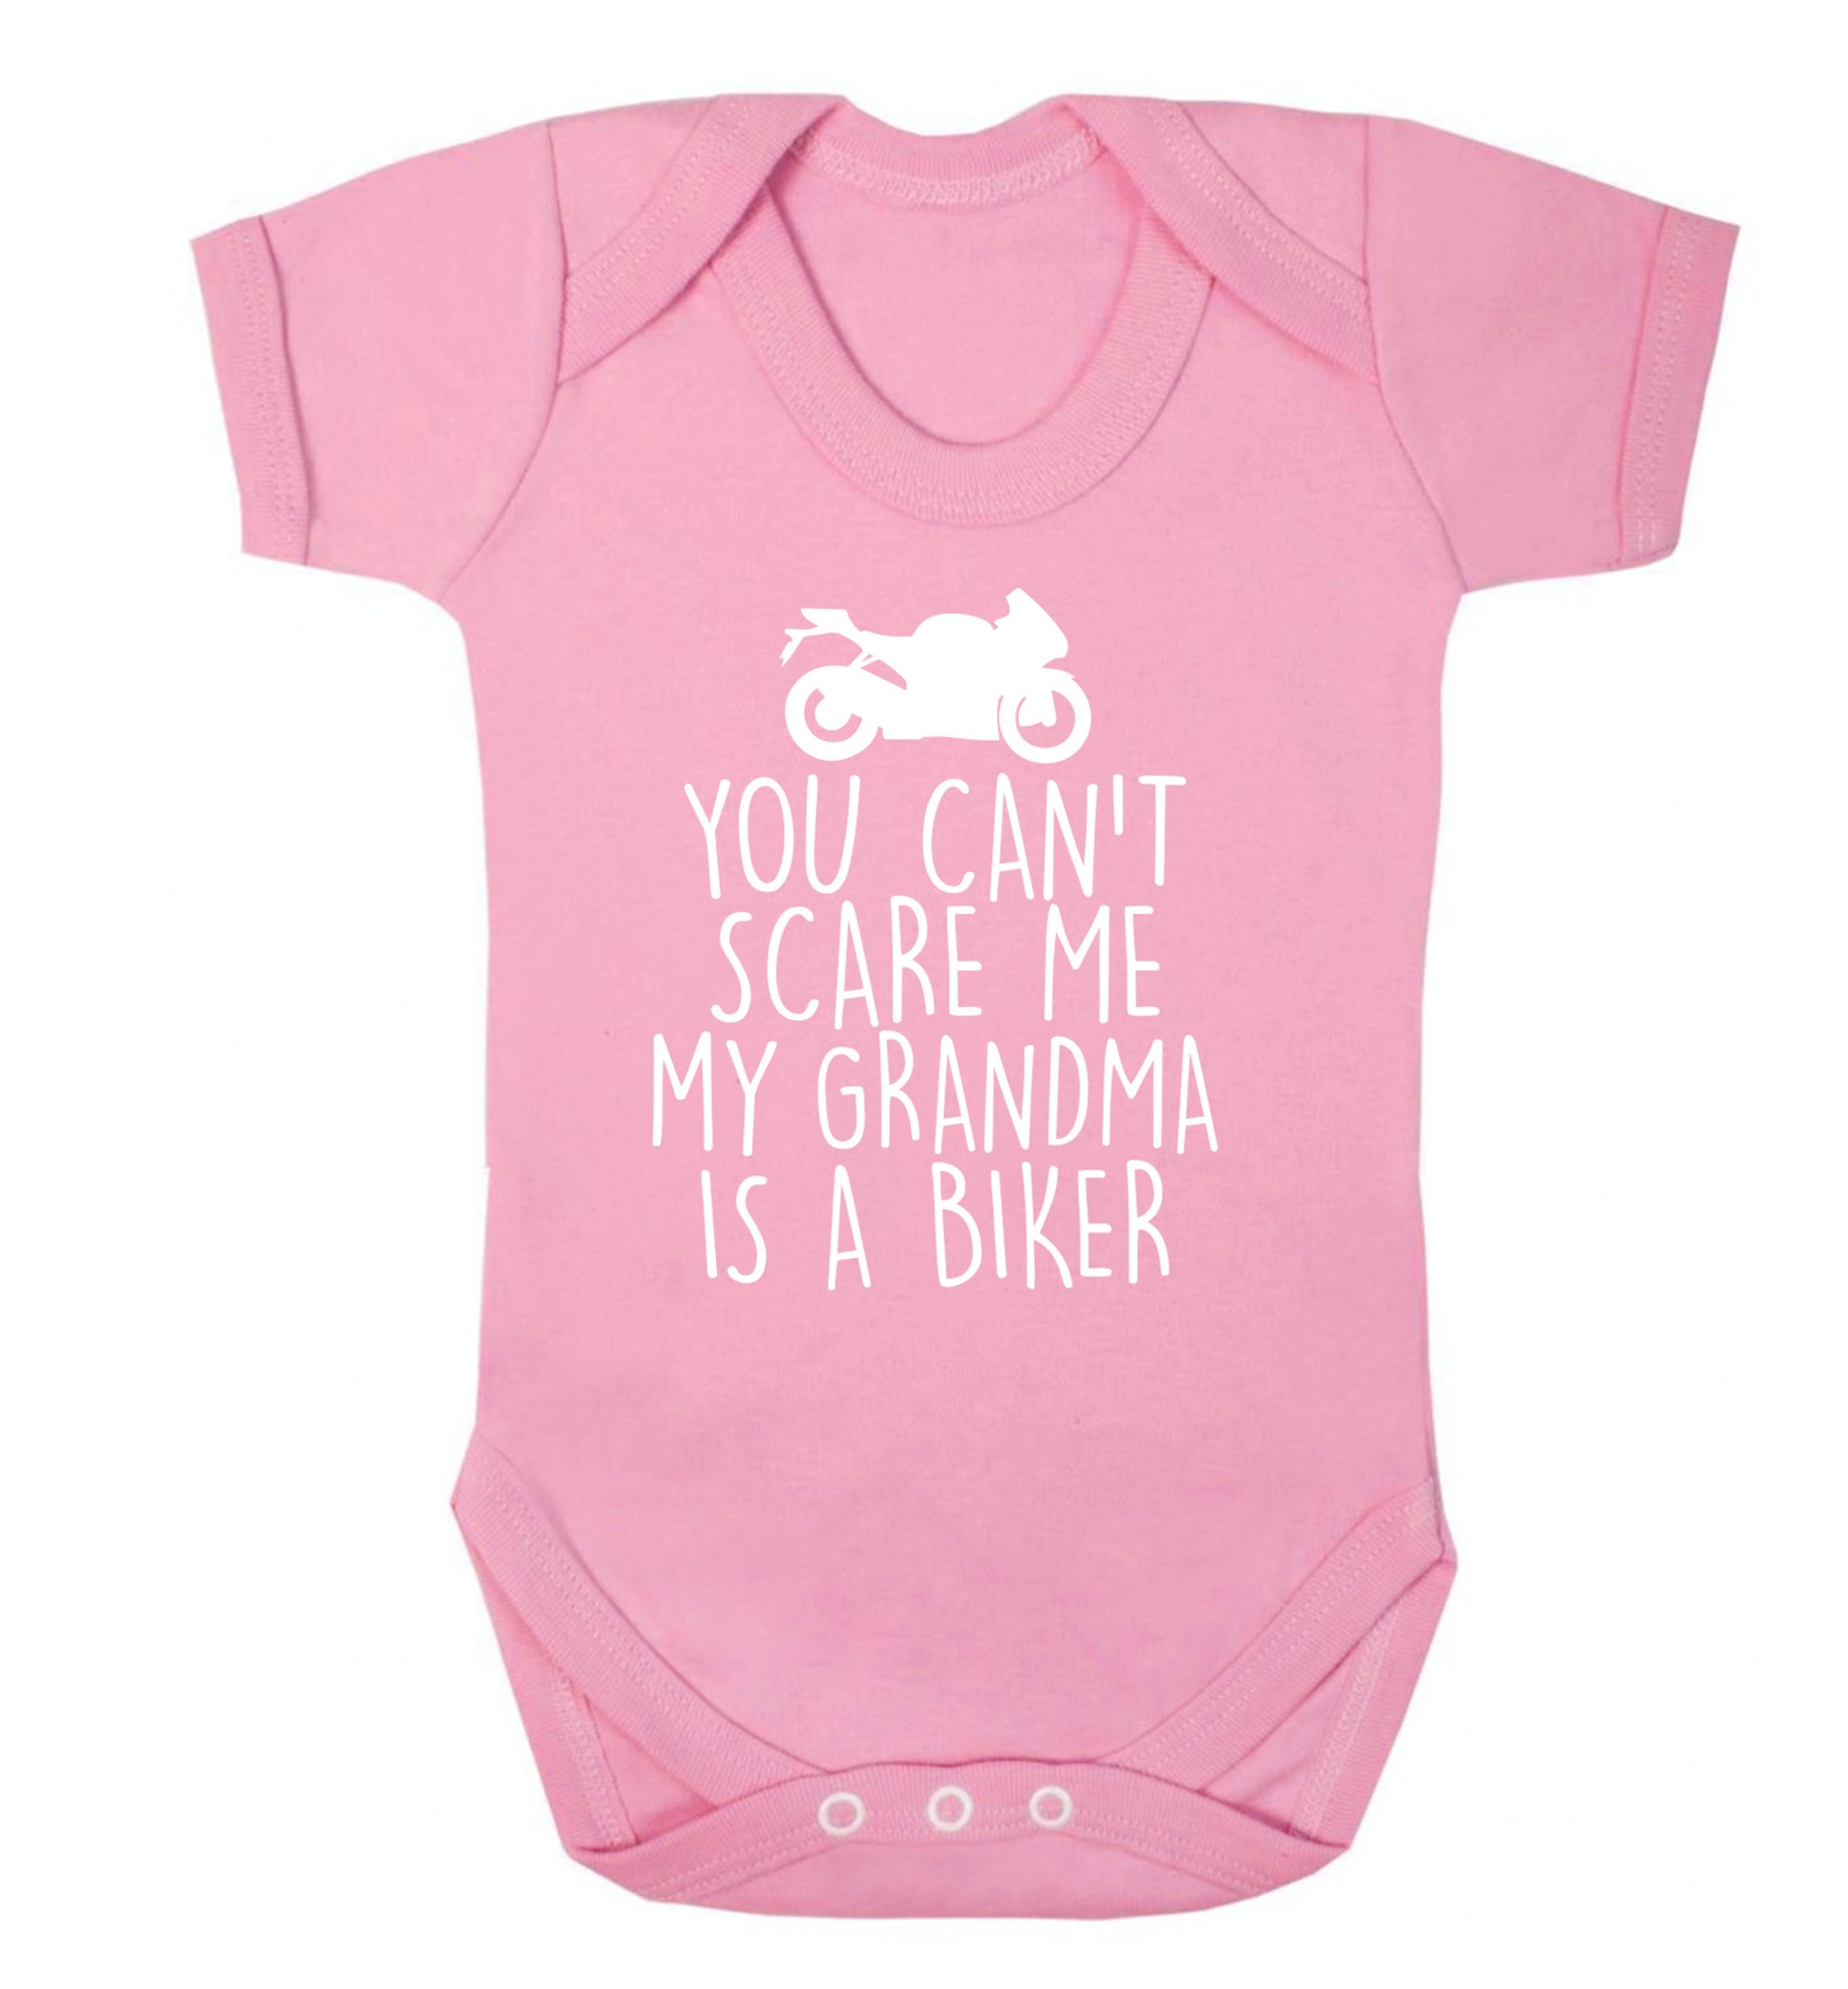 You can't scare me my grandma is a biker Baby Vest pale pink 18-24 months